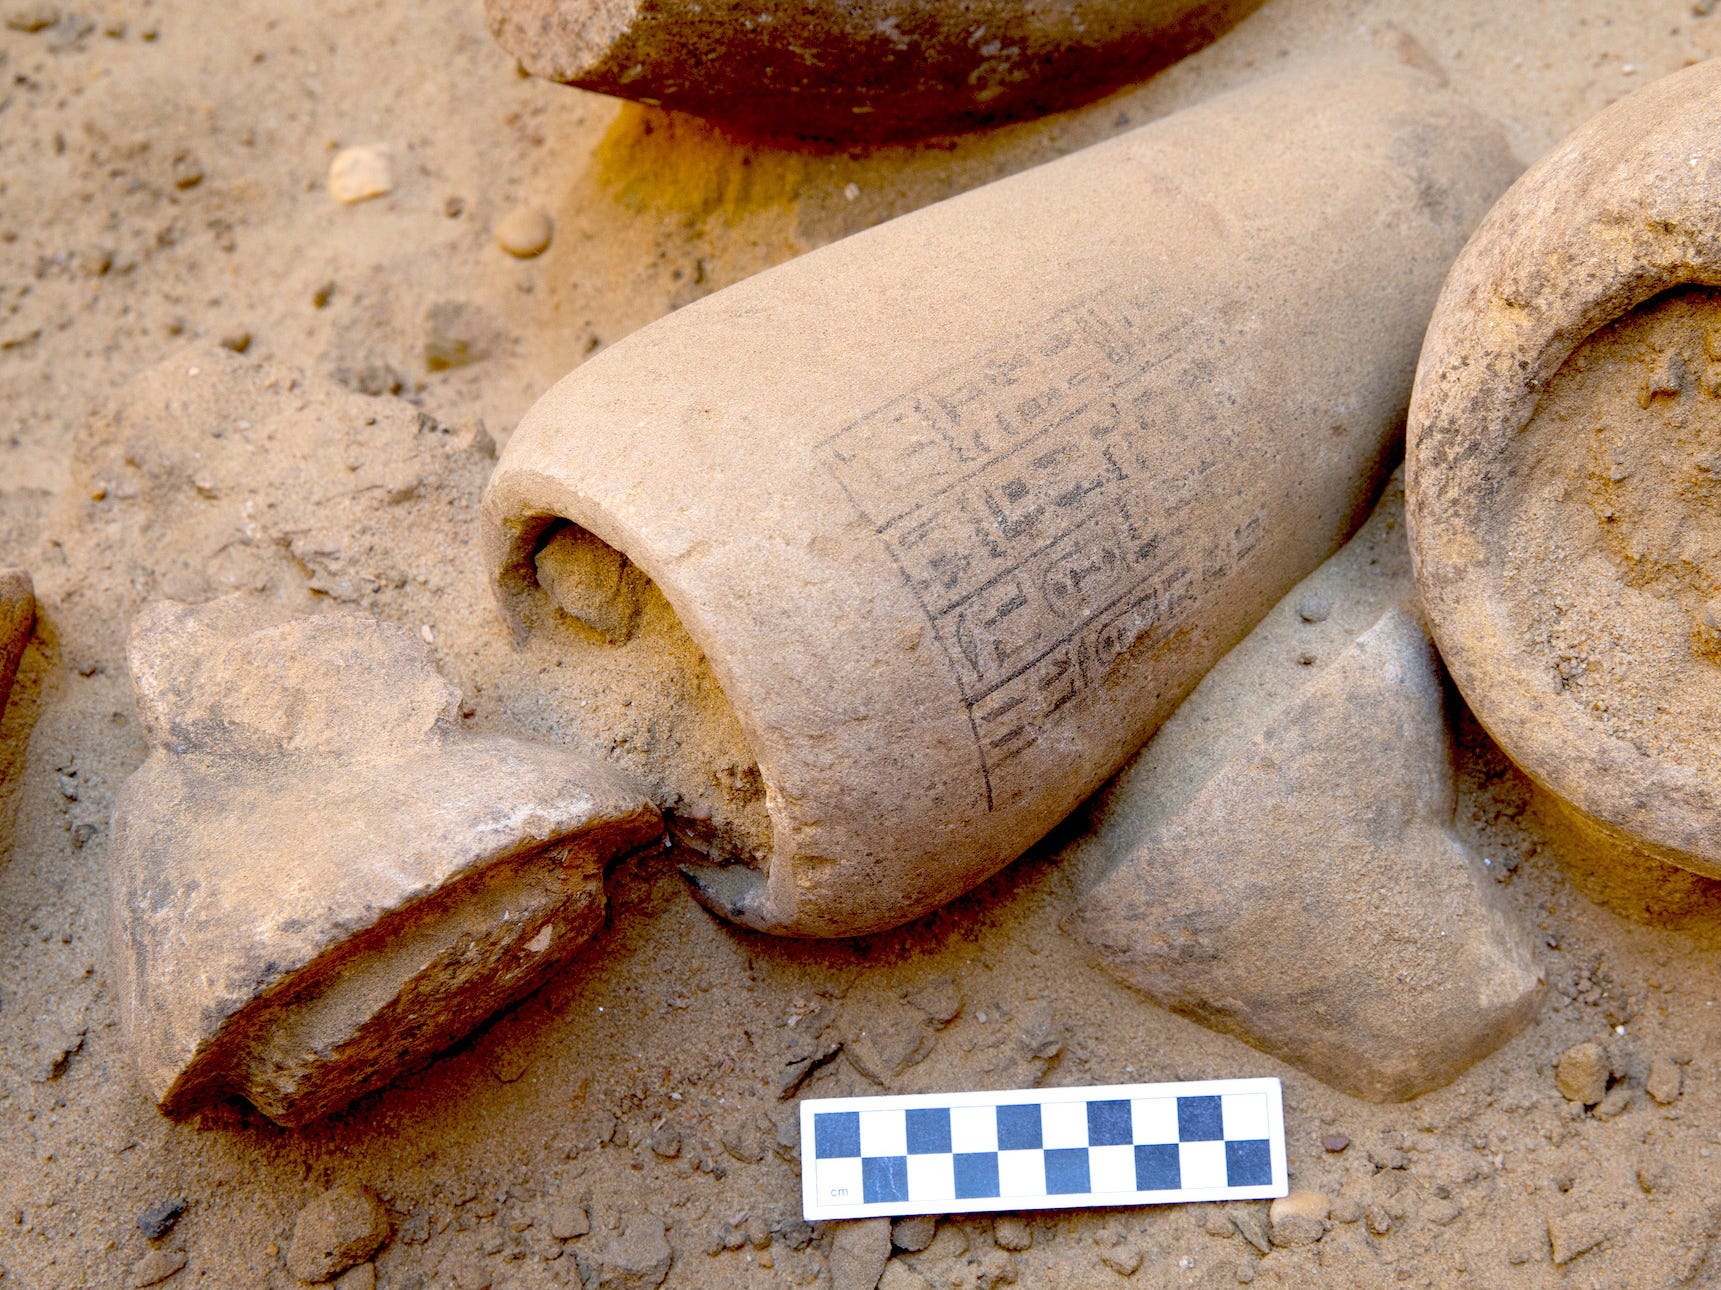 A jar is shown as found at the Abusir site, opened, with the lid having some sort of animal head on it and the body being covered with hieroglyphics.